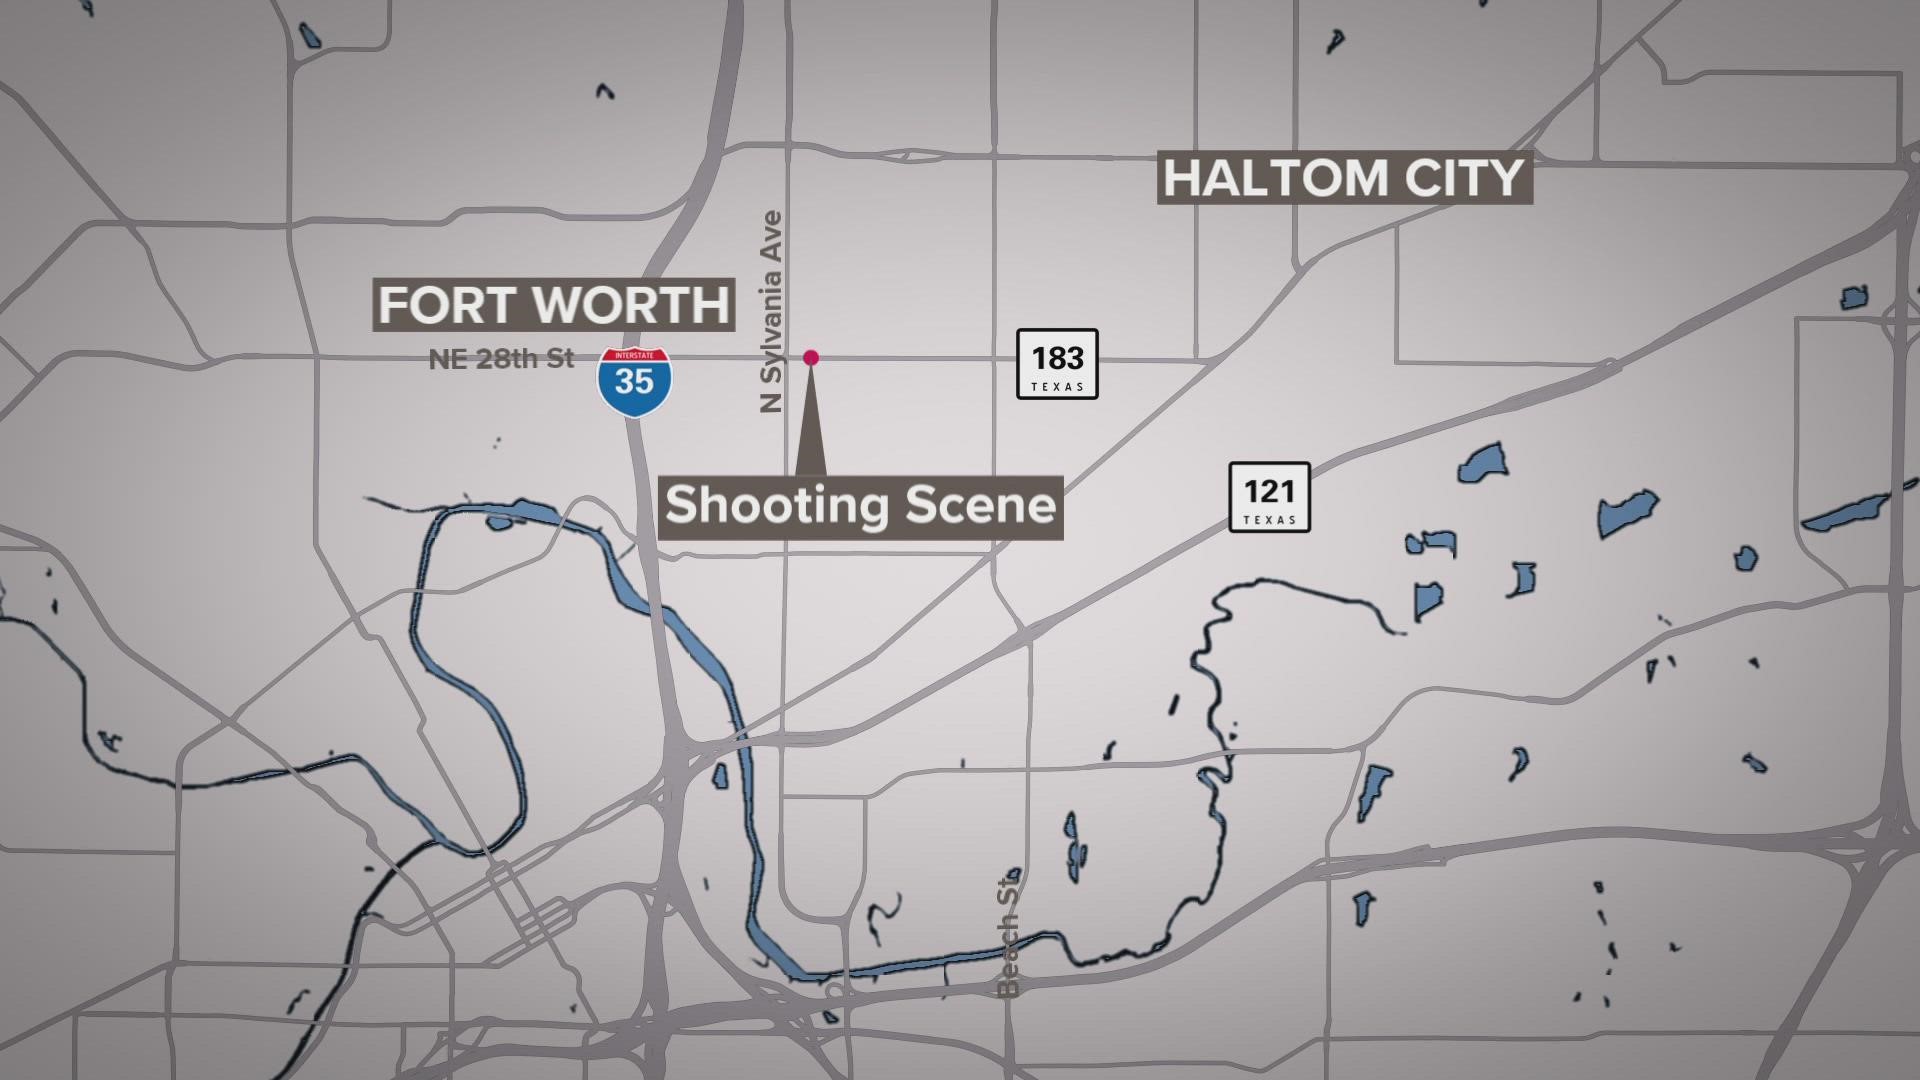 Haltom City Officers say they tried to stop the suspect in their city, but the chase led to Forth Worth. The suspect allegedly got out the vehicle with a weapon.